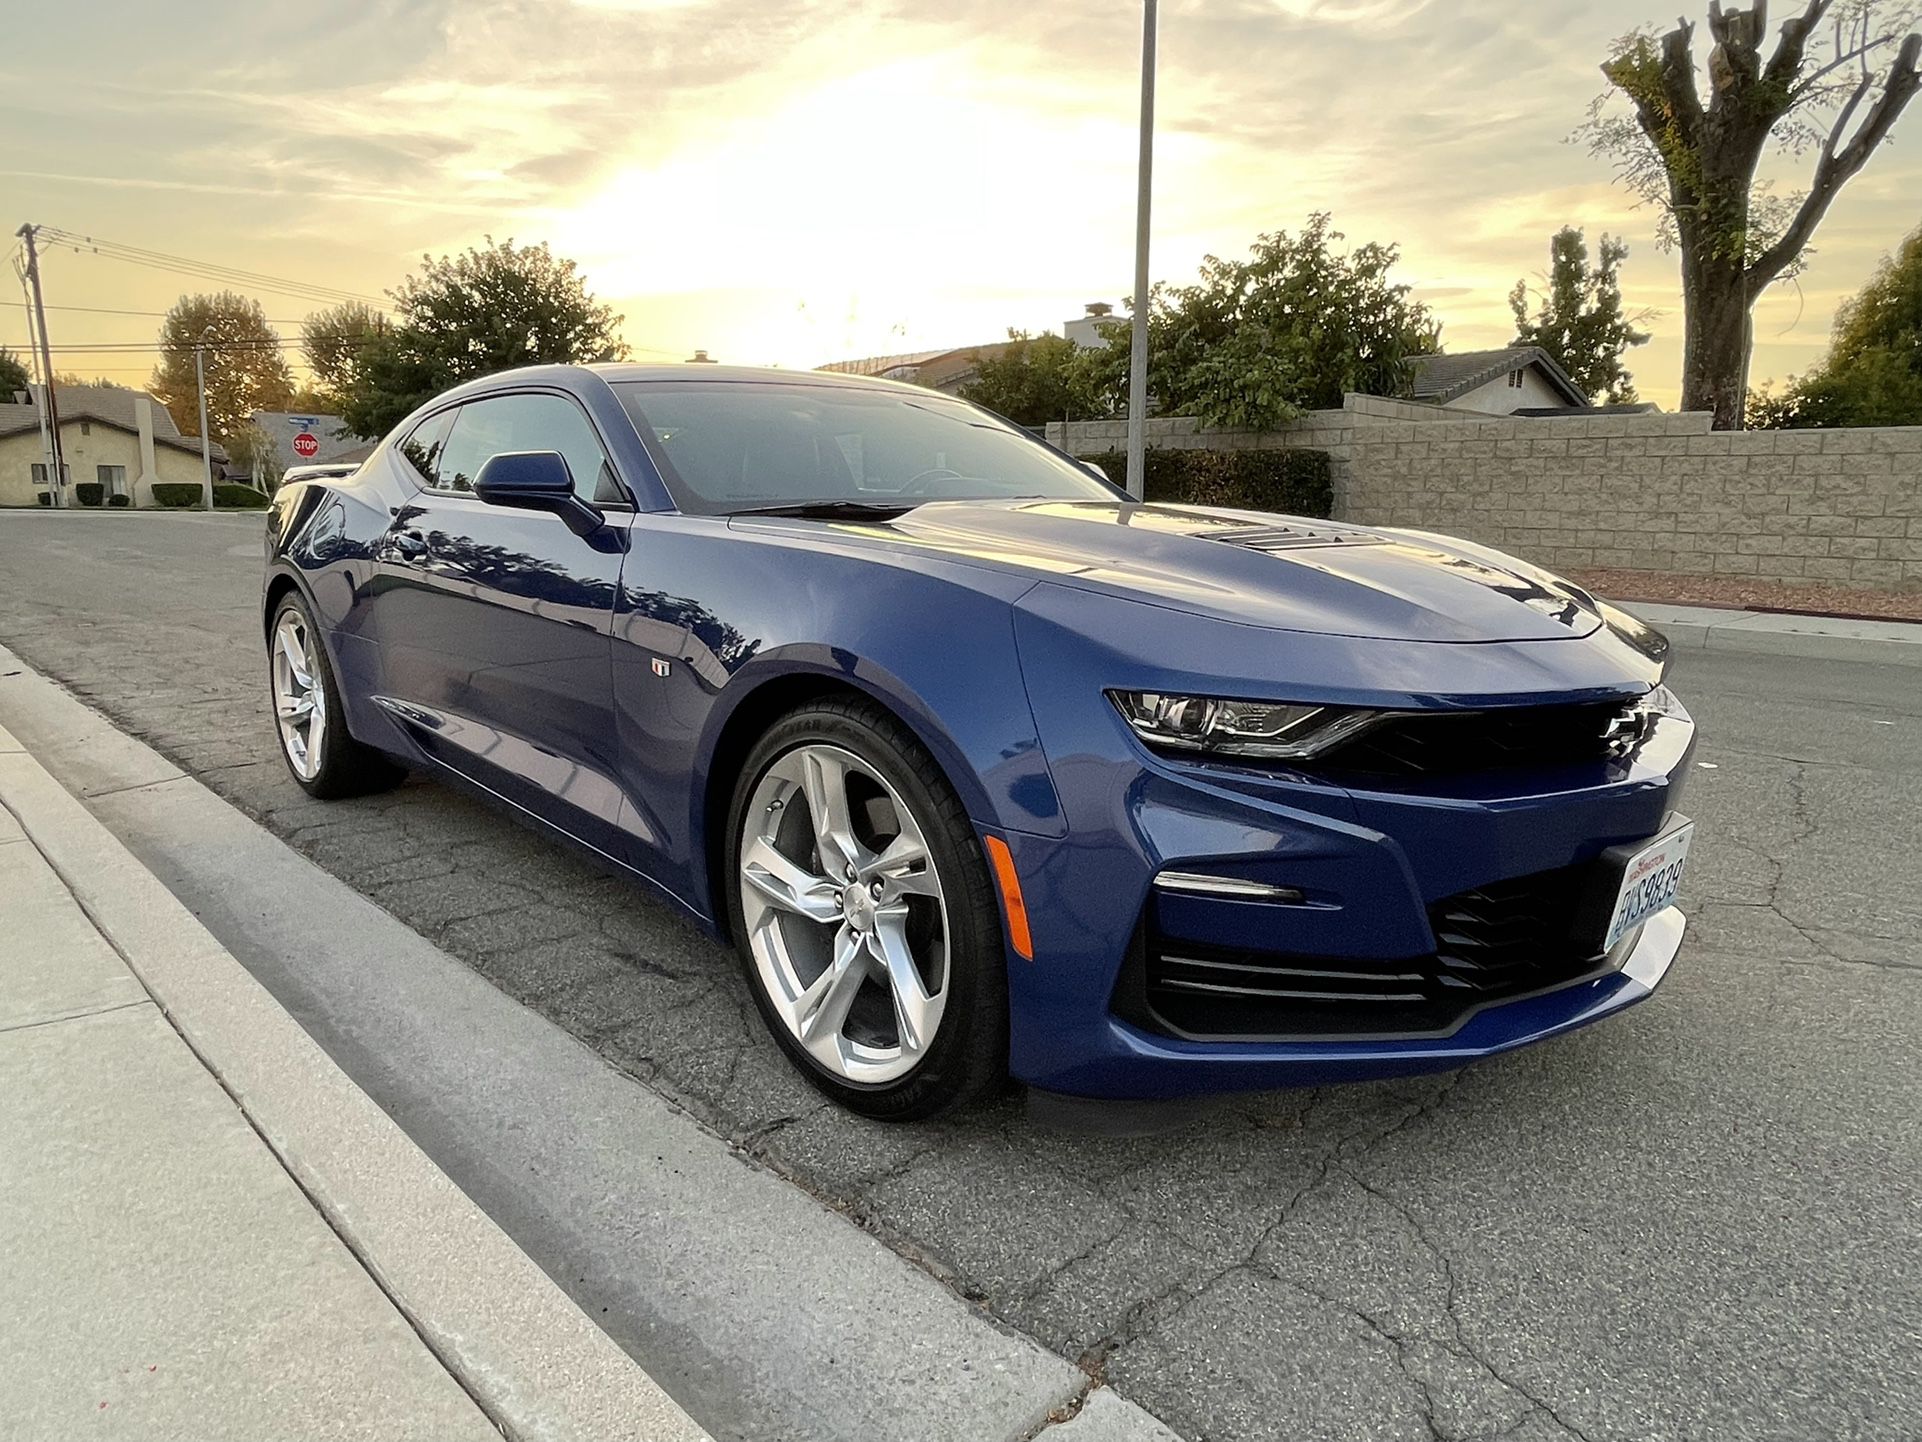 2020 Chevrolet Camero SS Clean Title.